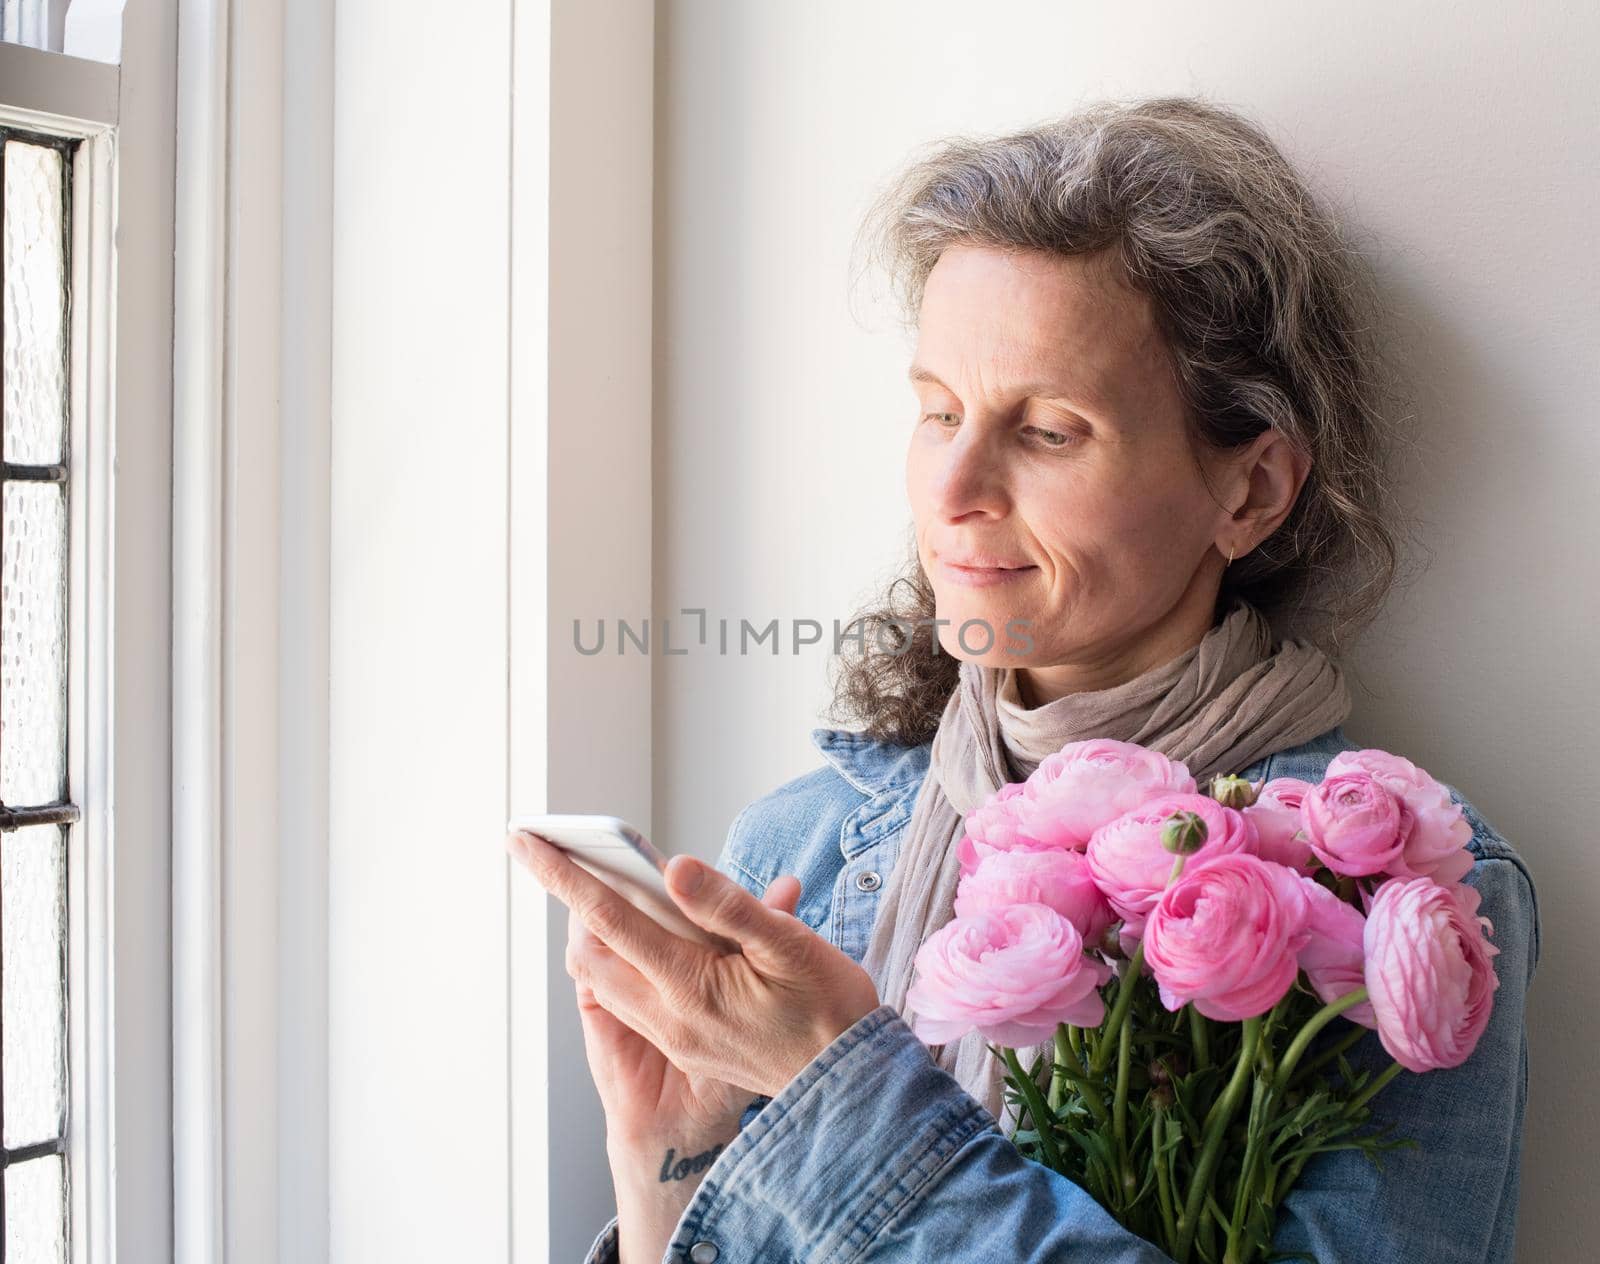 Middle aged woman with grey hair and denim shirt using smart phone, holding pink flowers and smiling by natalie_board